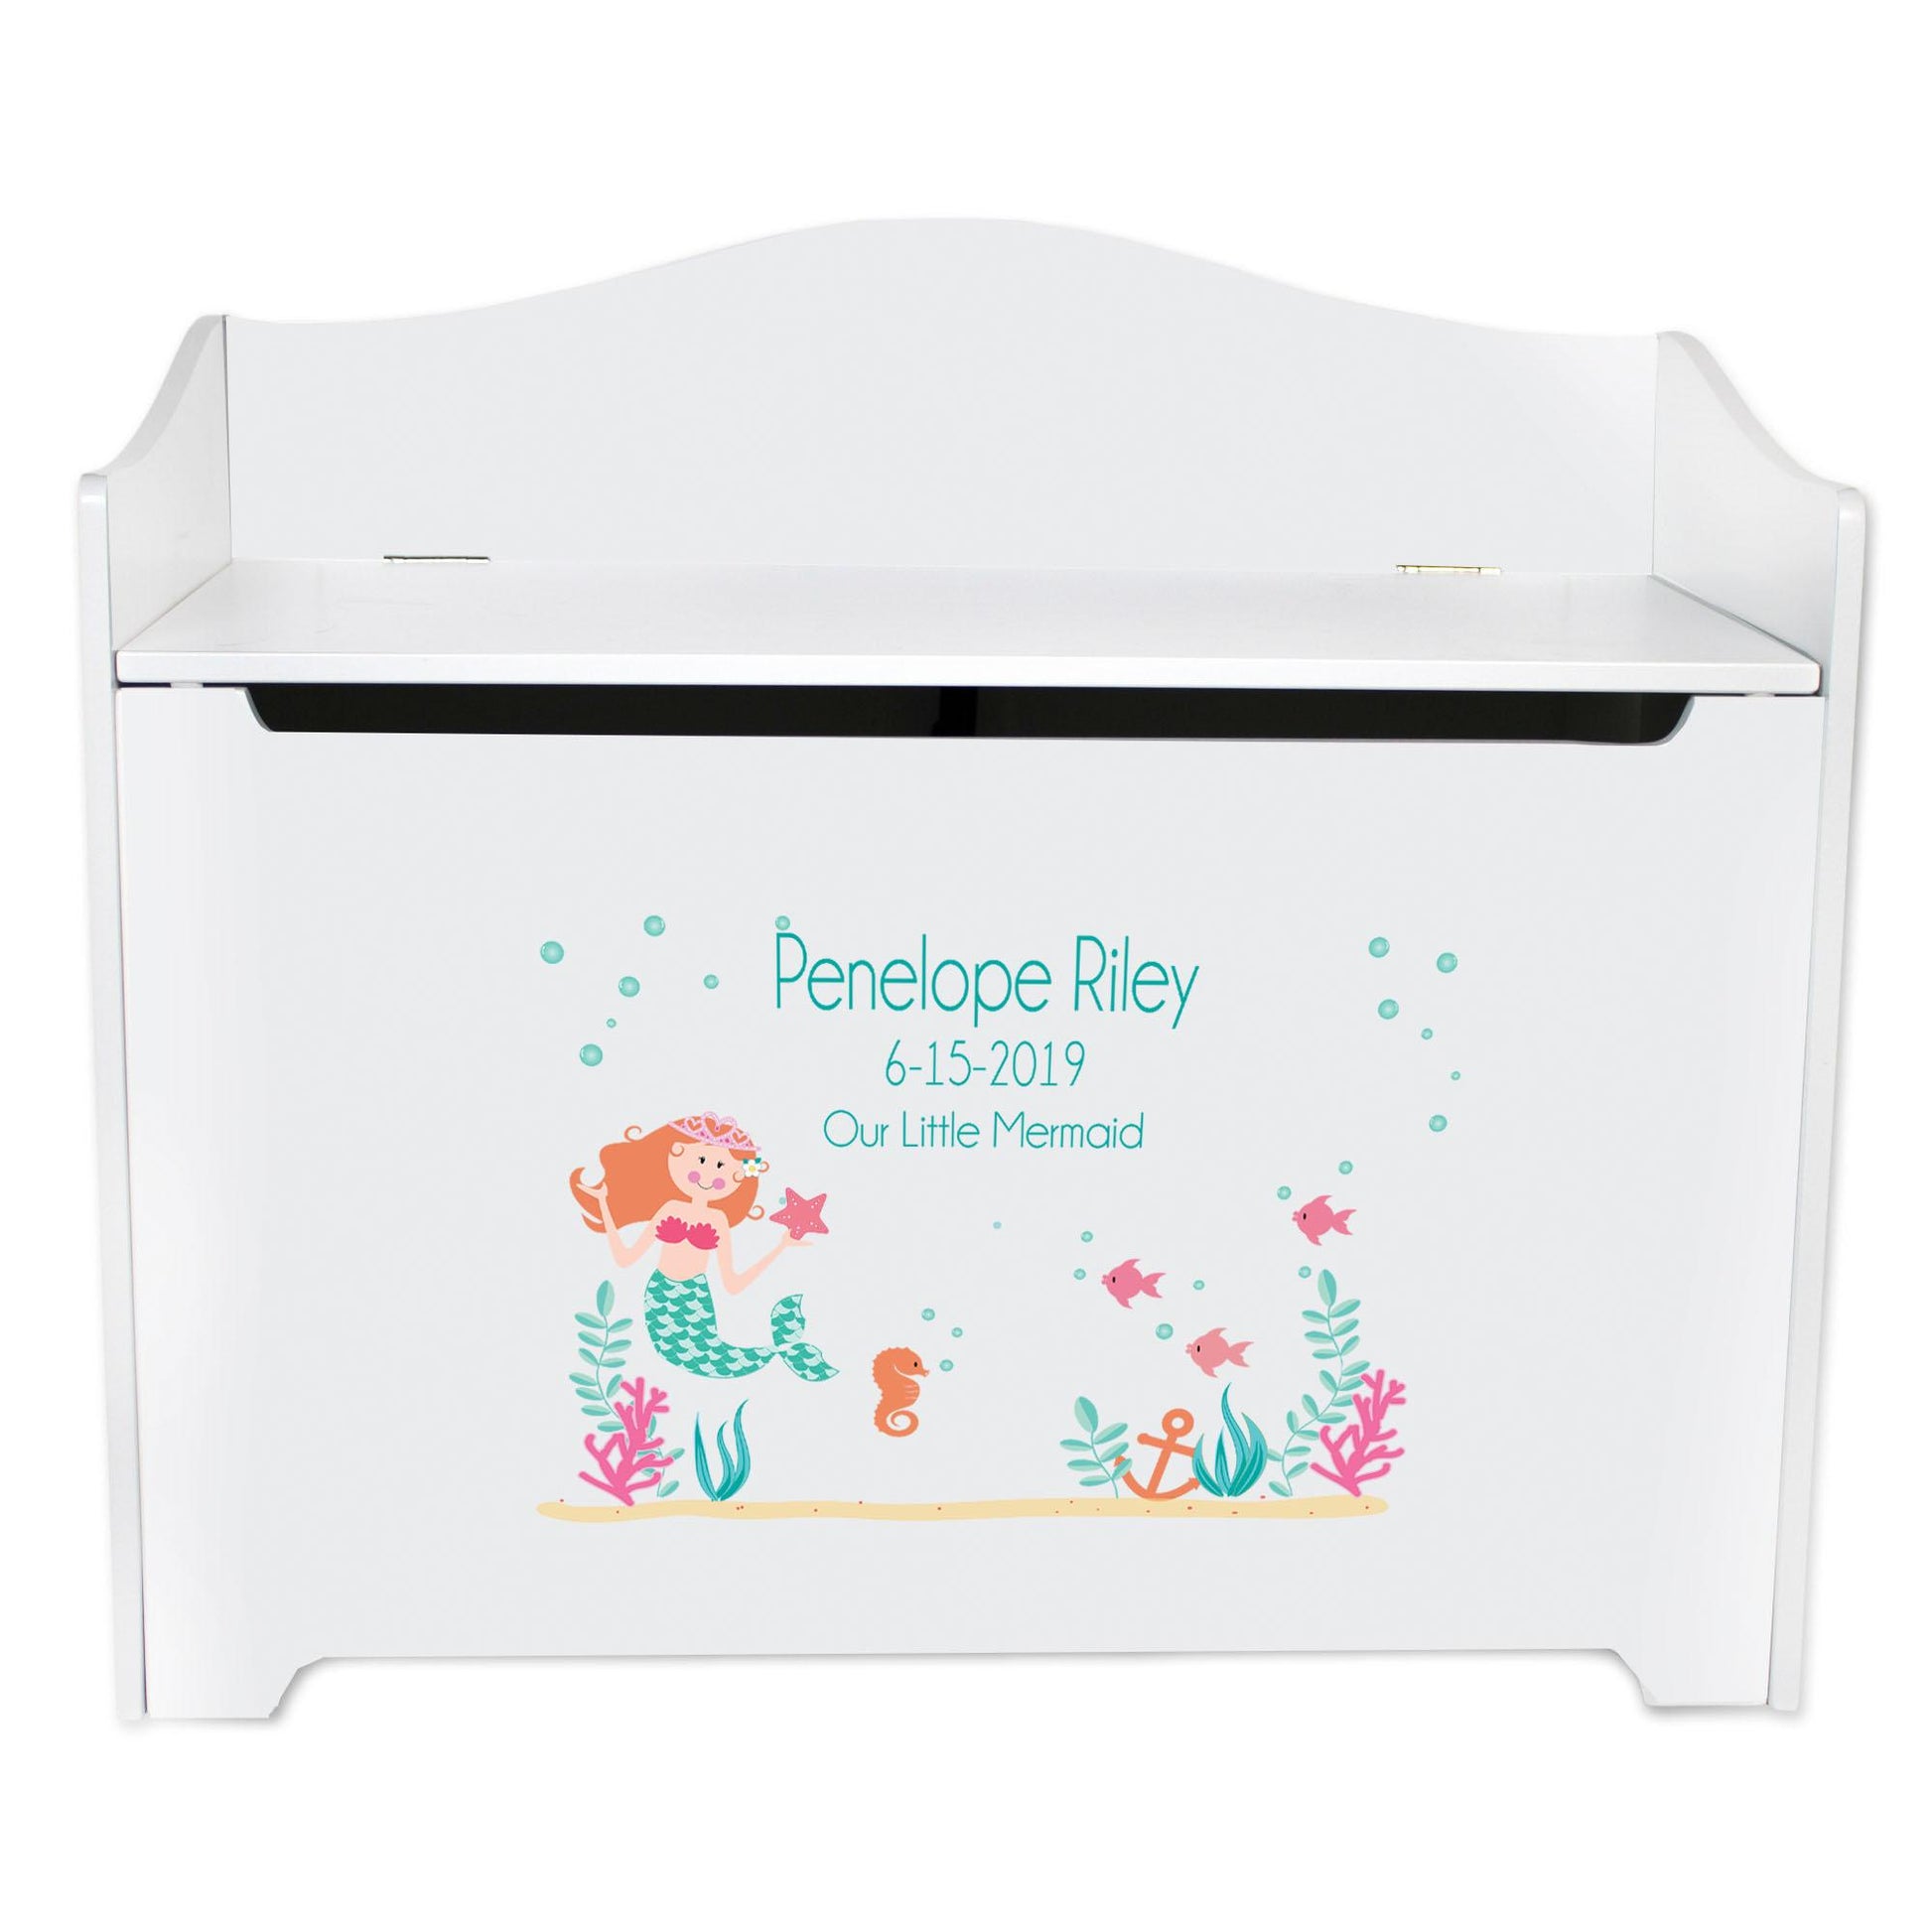 White Wooden Toy Box Bench with Mermaid Princess design